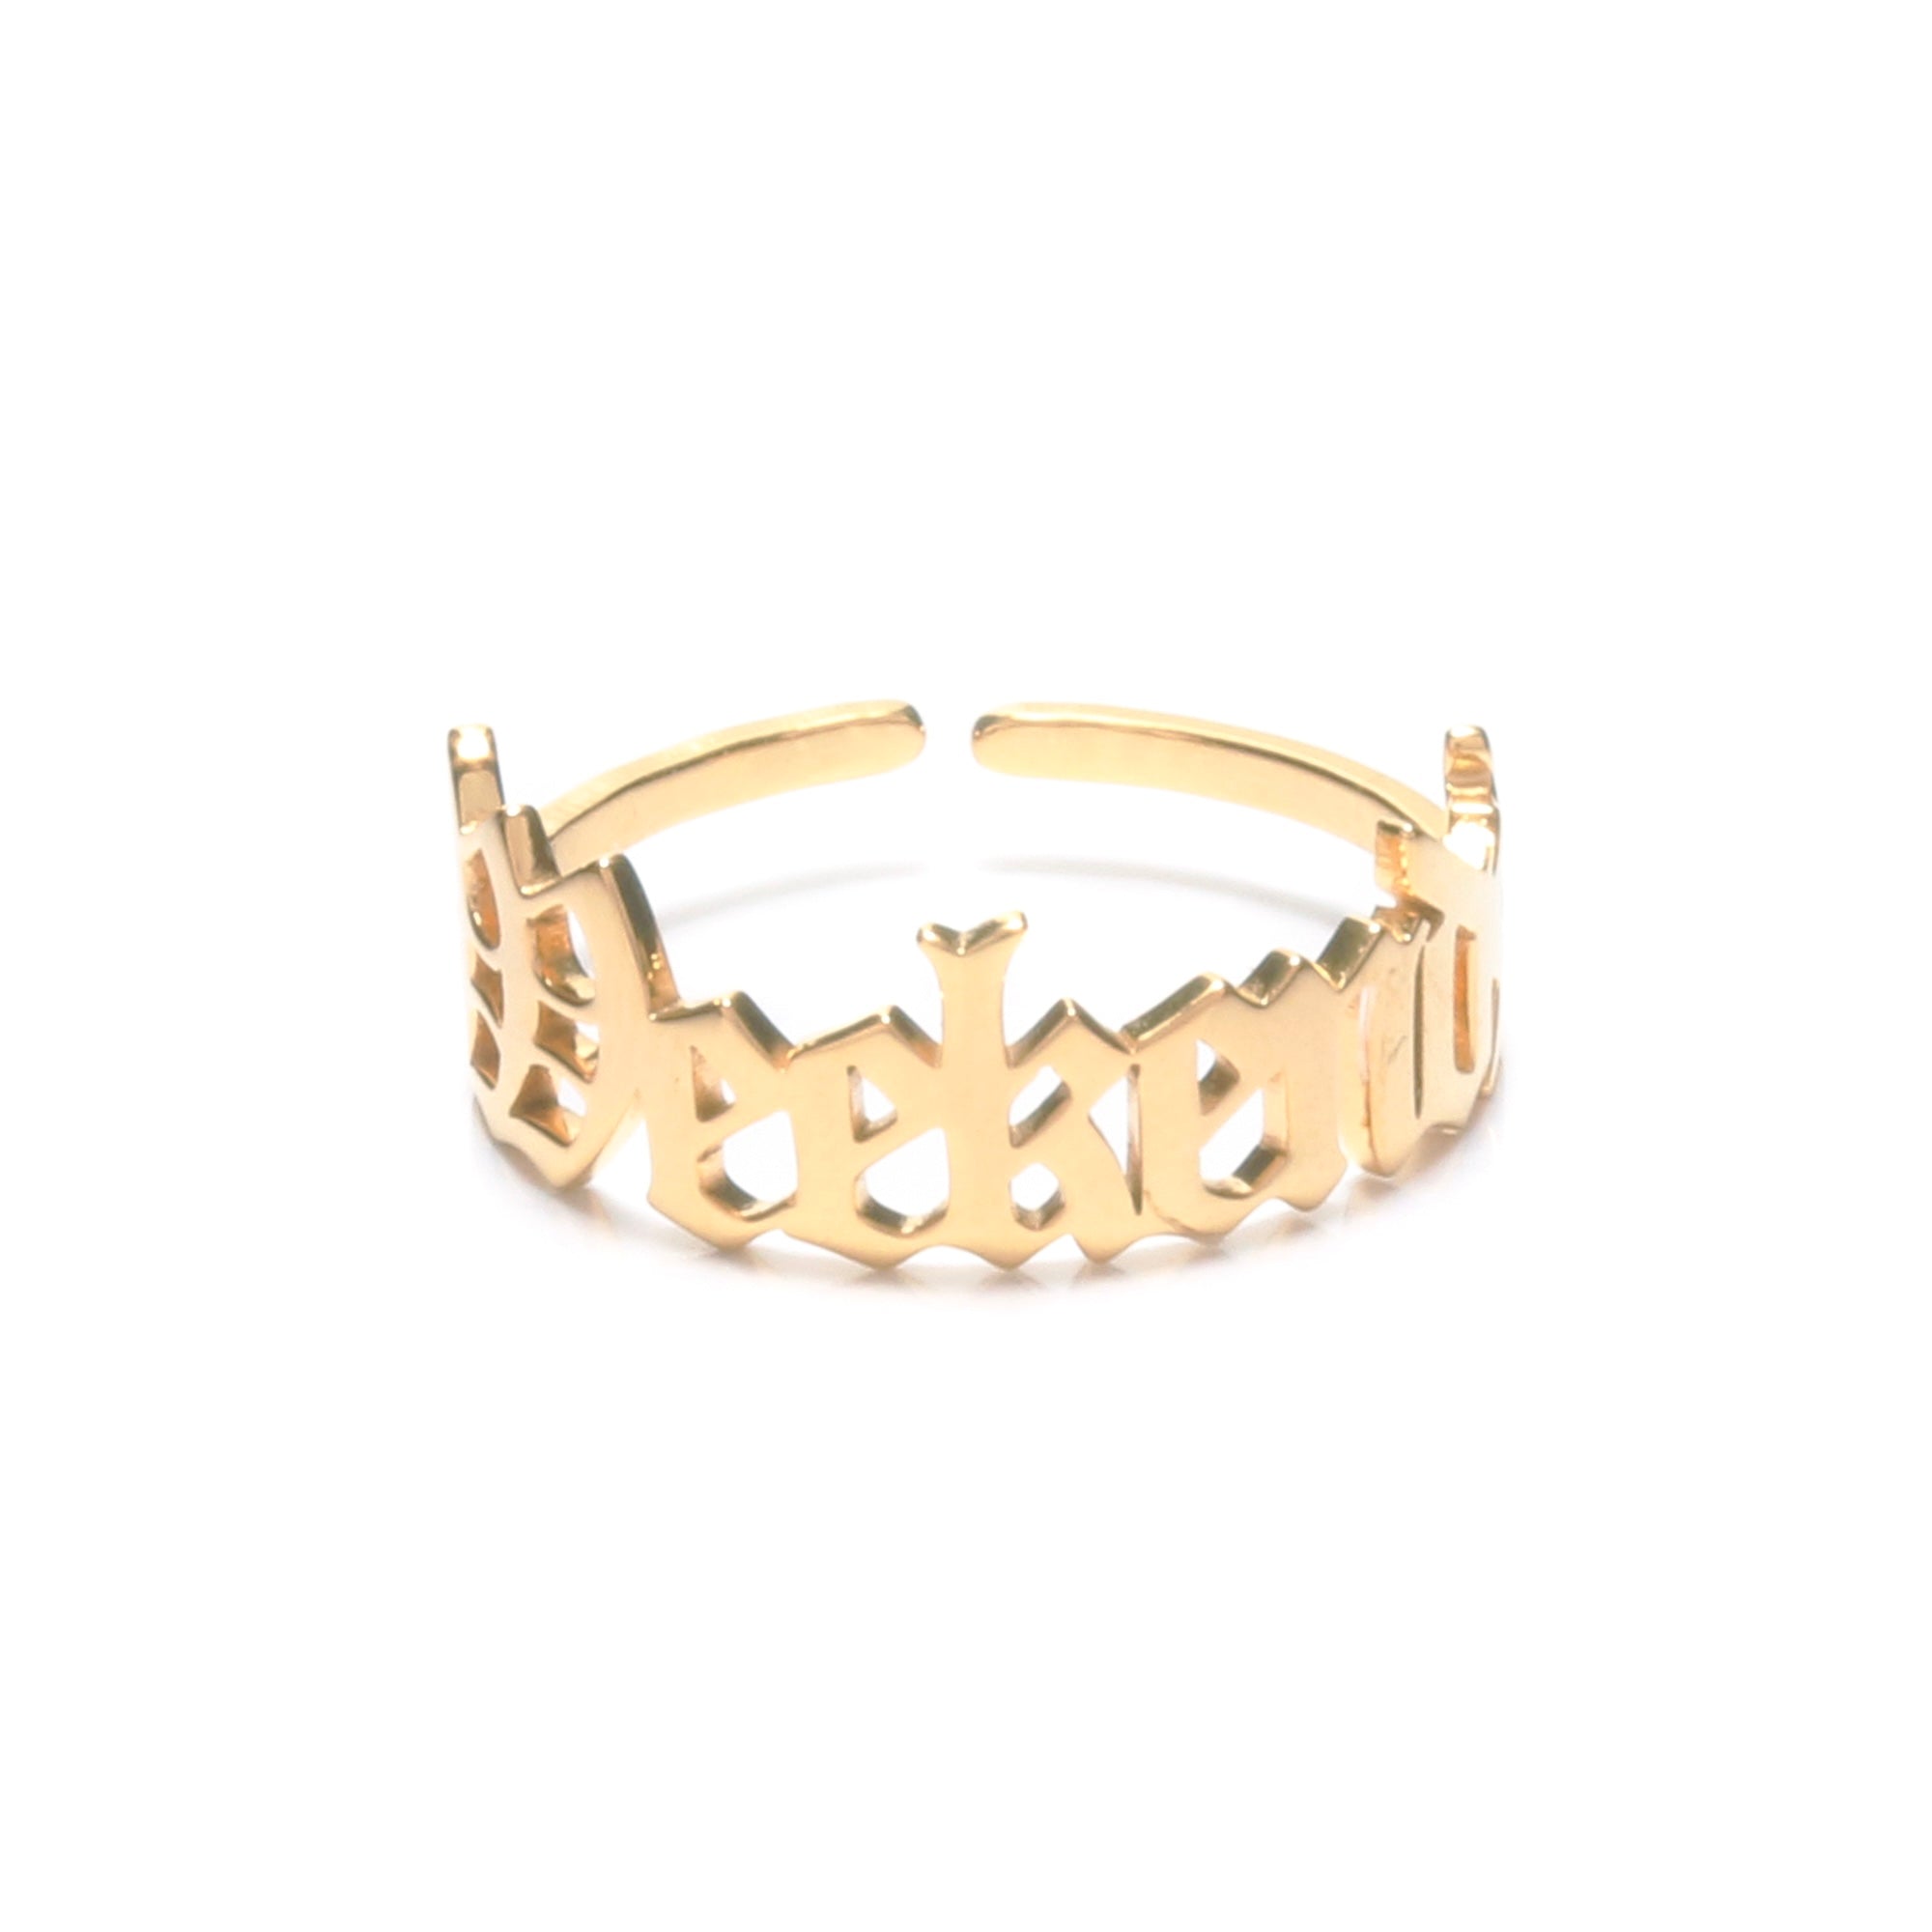 Name ring (choose from 14 fonts) 